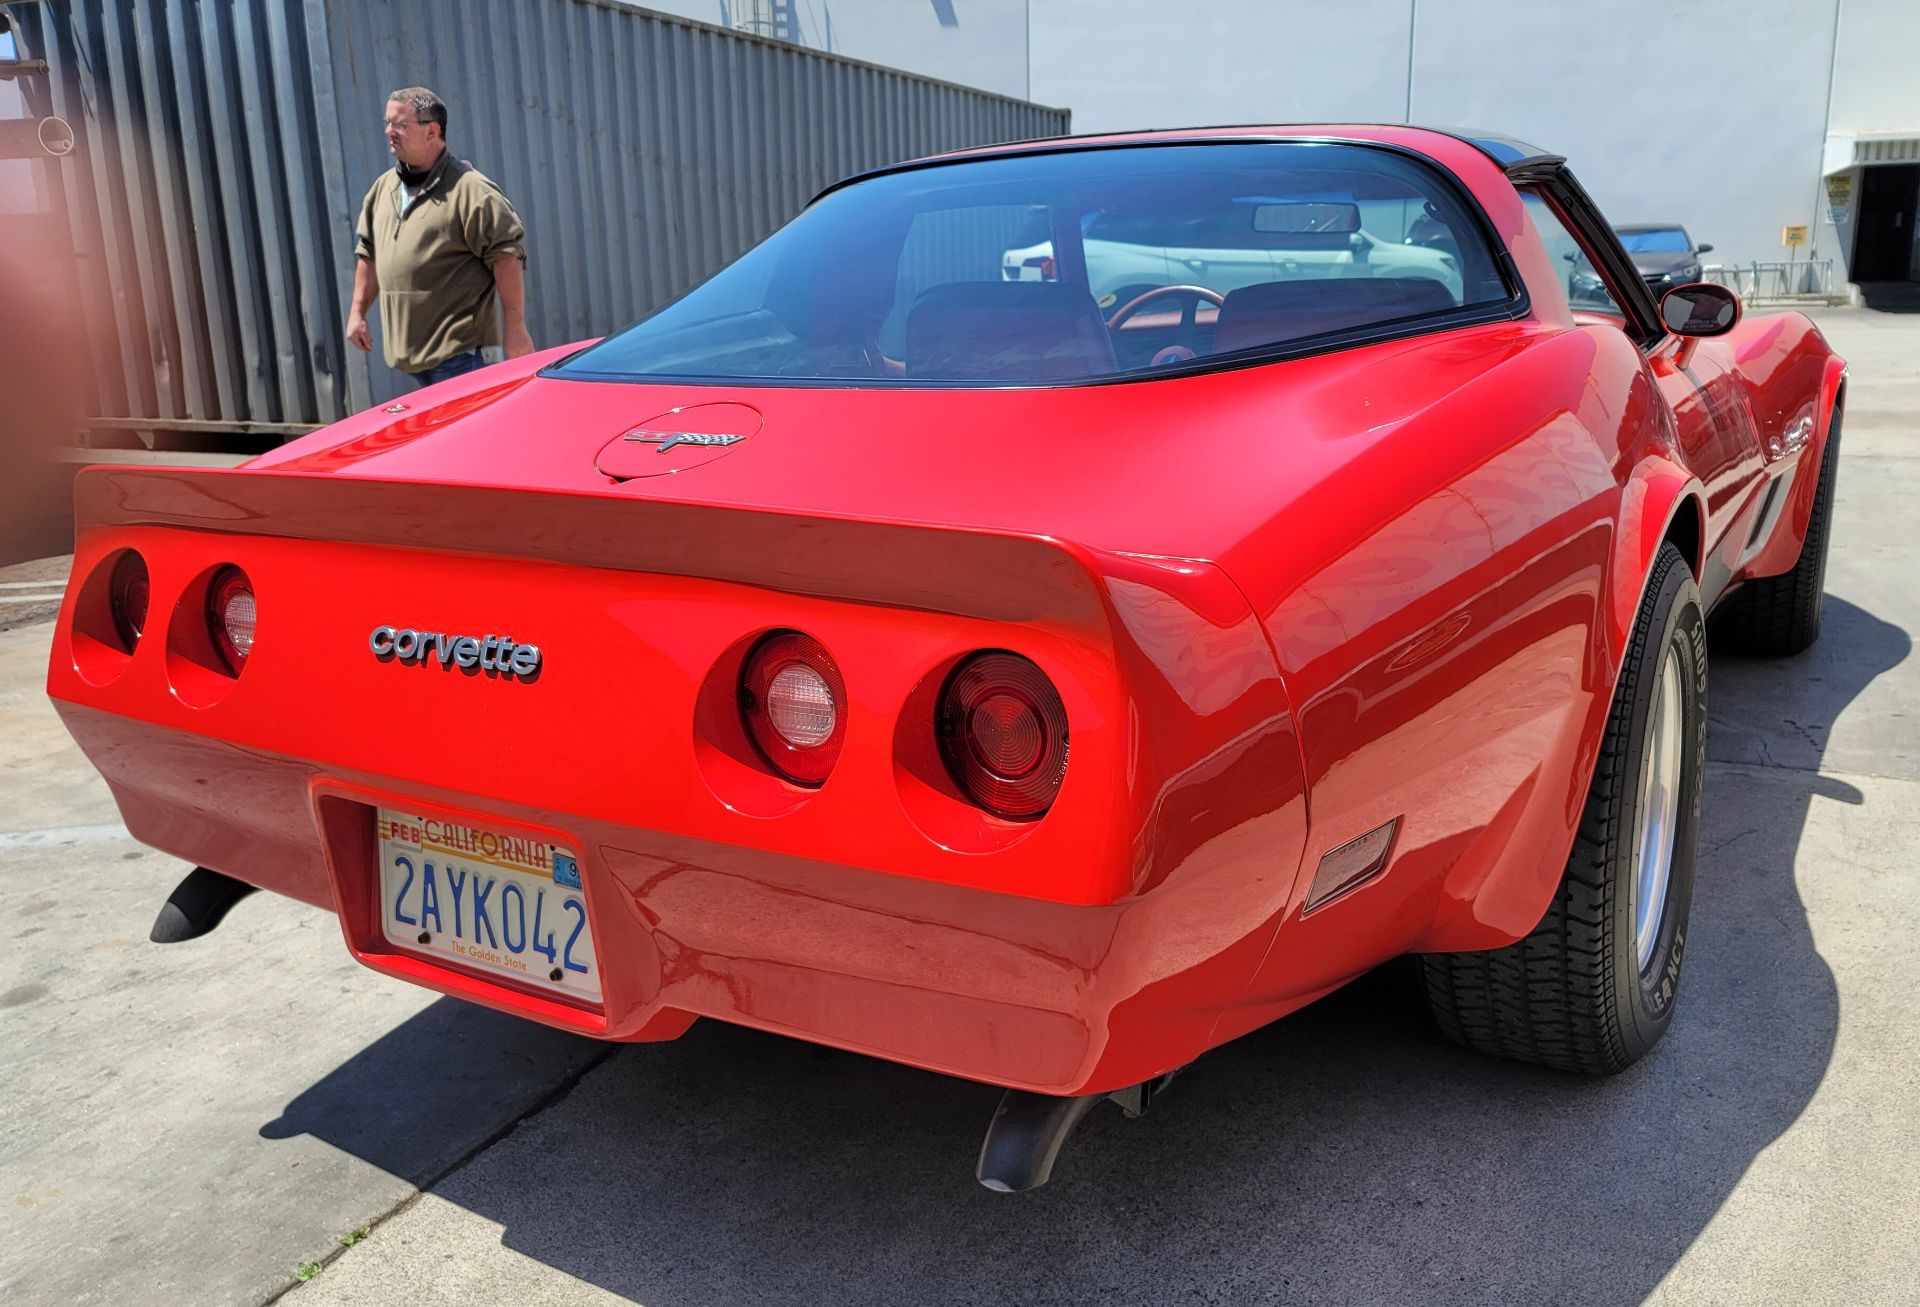 1980 CHEVROLET CORVETTE, WAS VIC EDELBROCK'S PERSONAL CAR BOUGHT FOR R&D, RED INTERIOR, TITLE ONLY. - Image 4 of 70